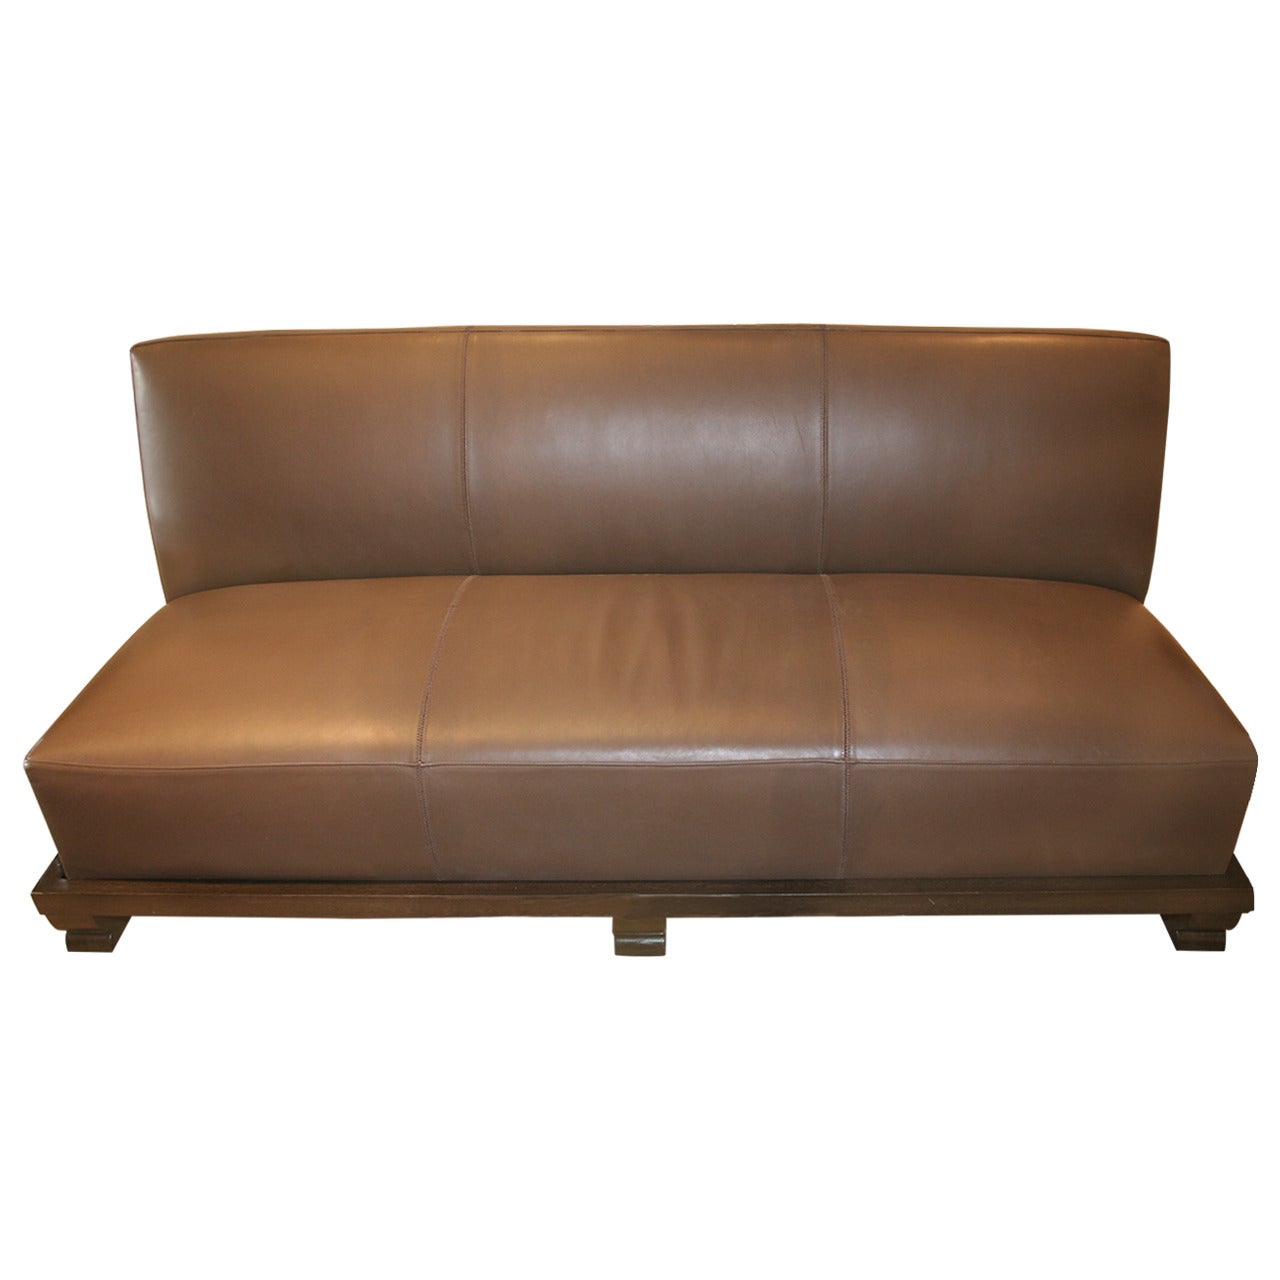 Emily Summers Studio Line Geoffrey Beene Sofa in Chocolate Top-Stitch Leather For Sale